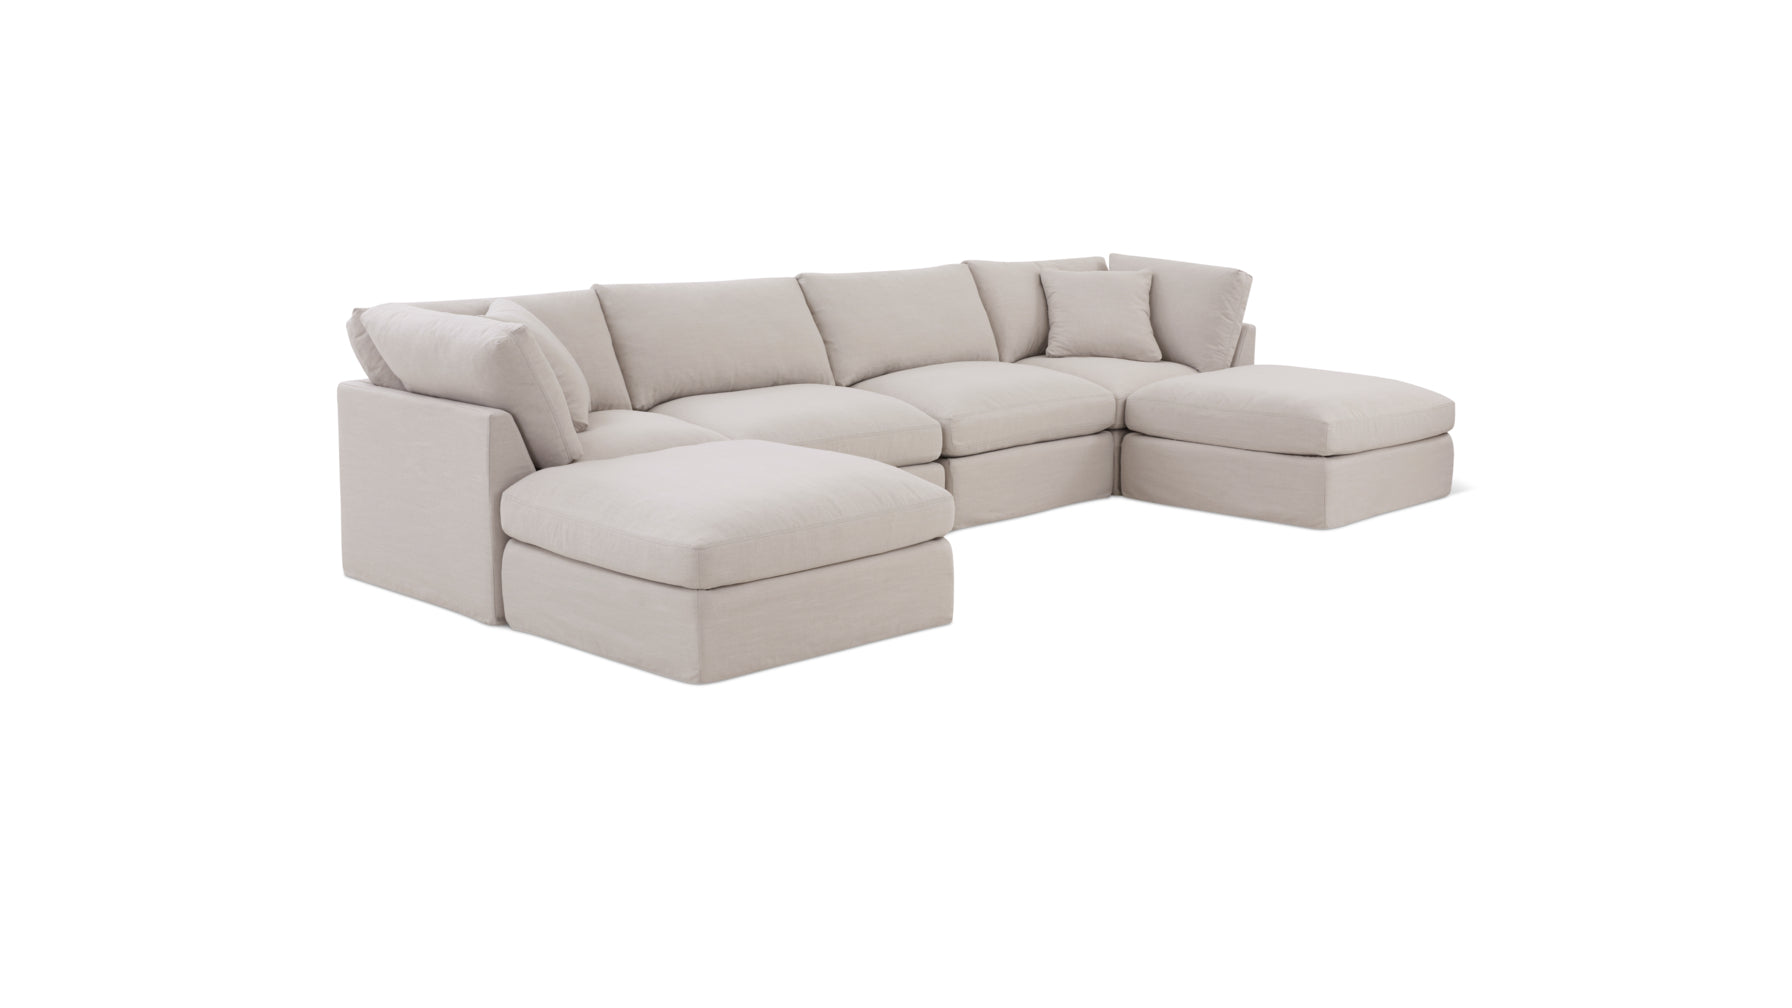 Get Together™ 6-Piece Modular U-Shaped Sectional, Standard, Clay - Image 2